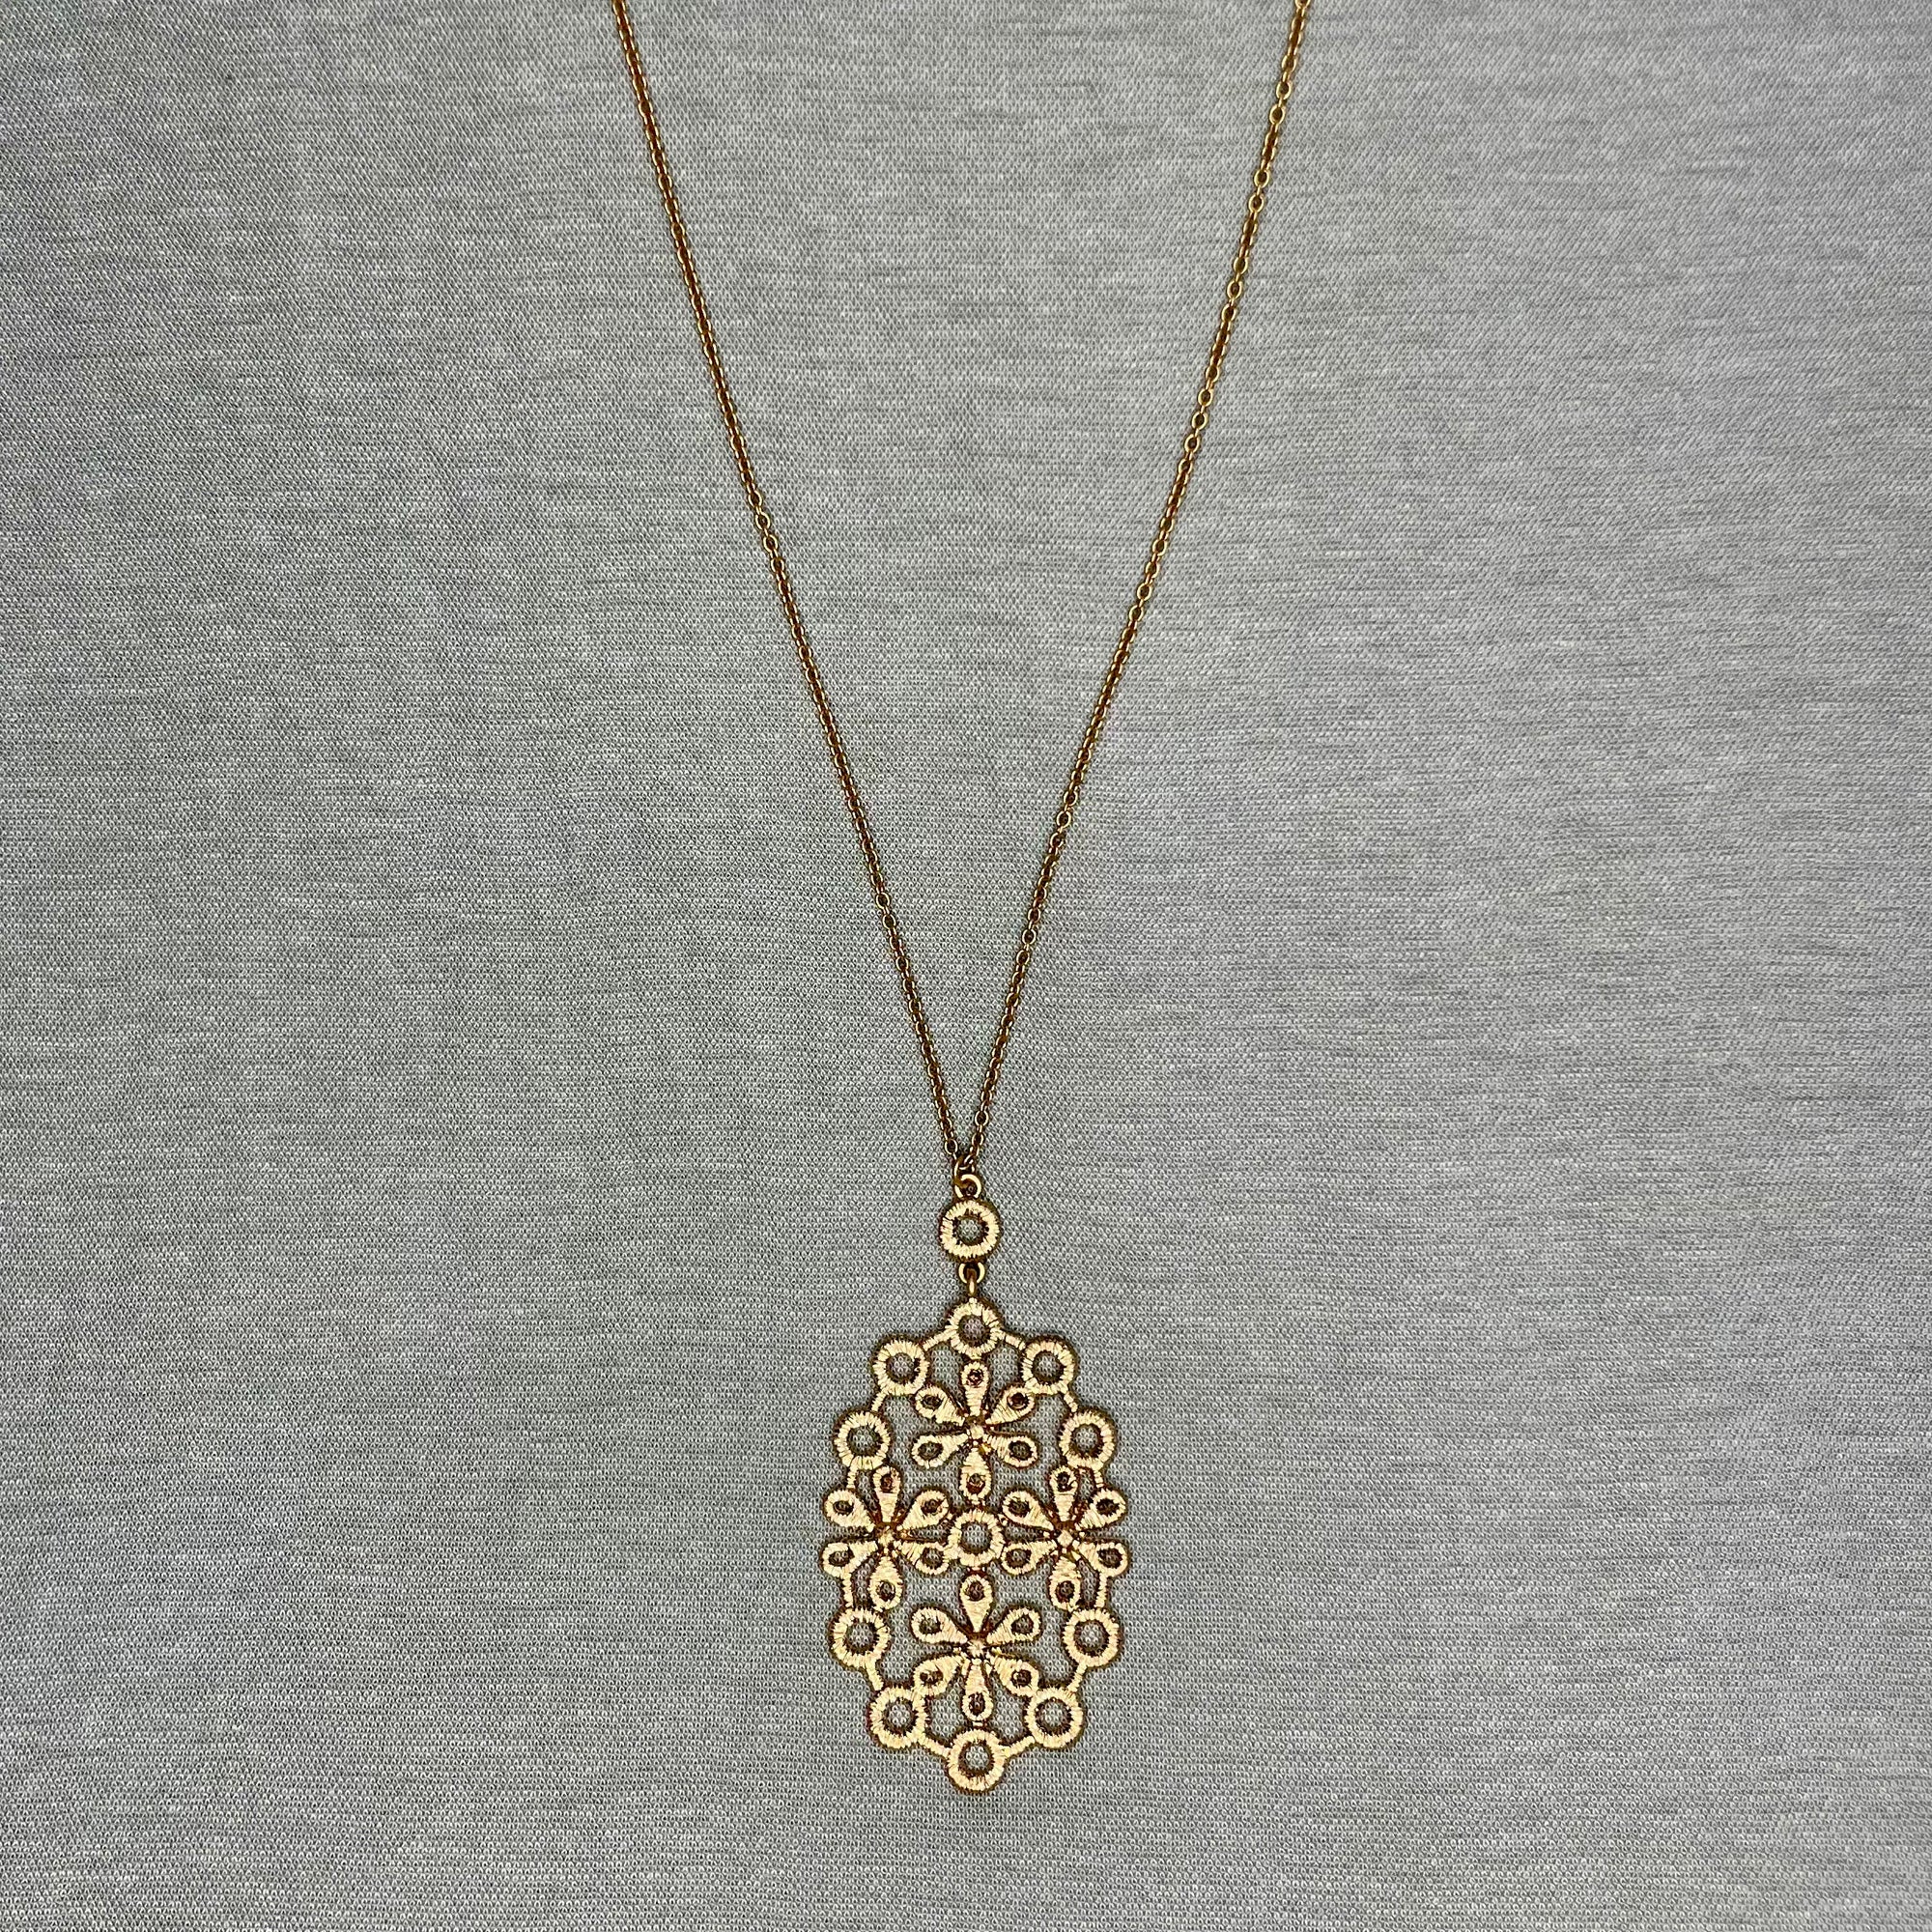 Necklace - Lace Flower Gold